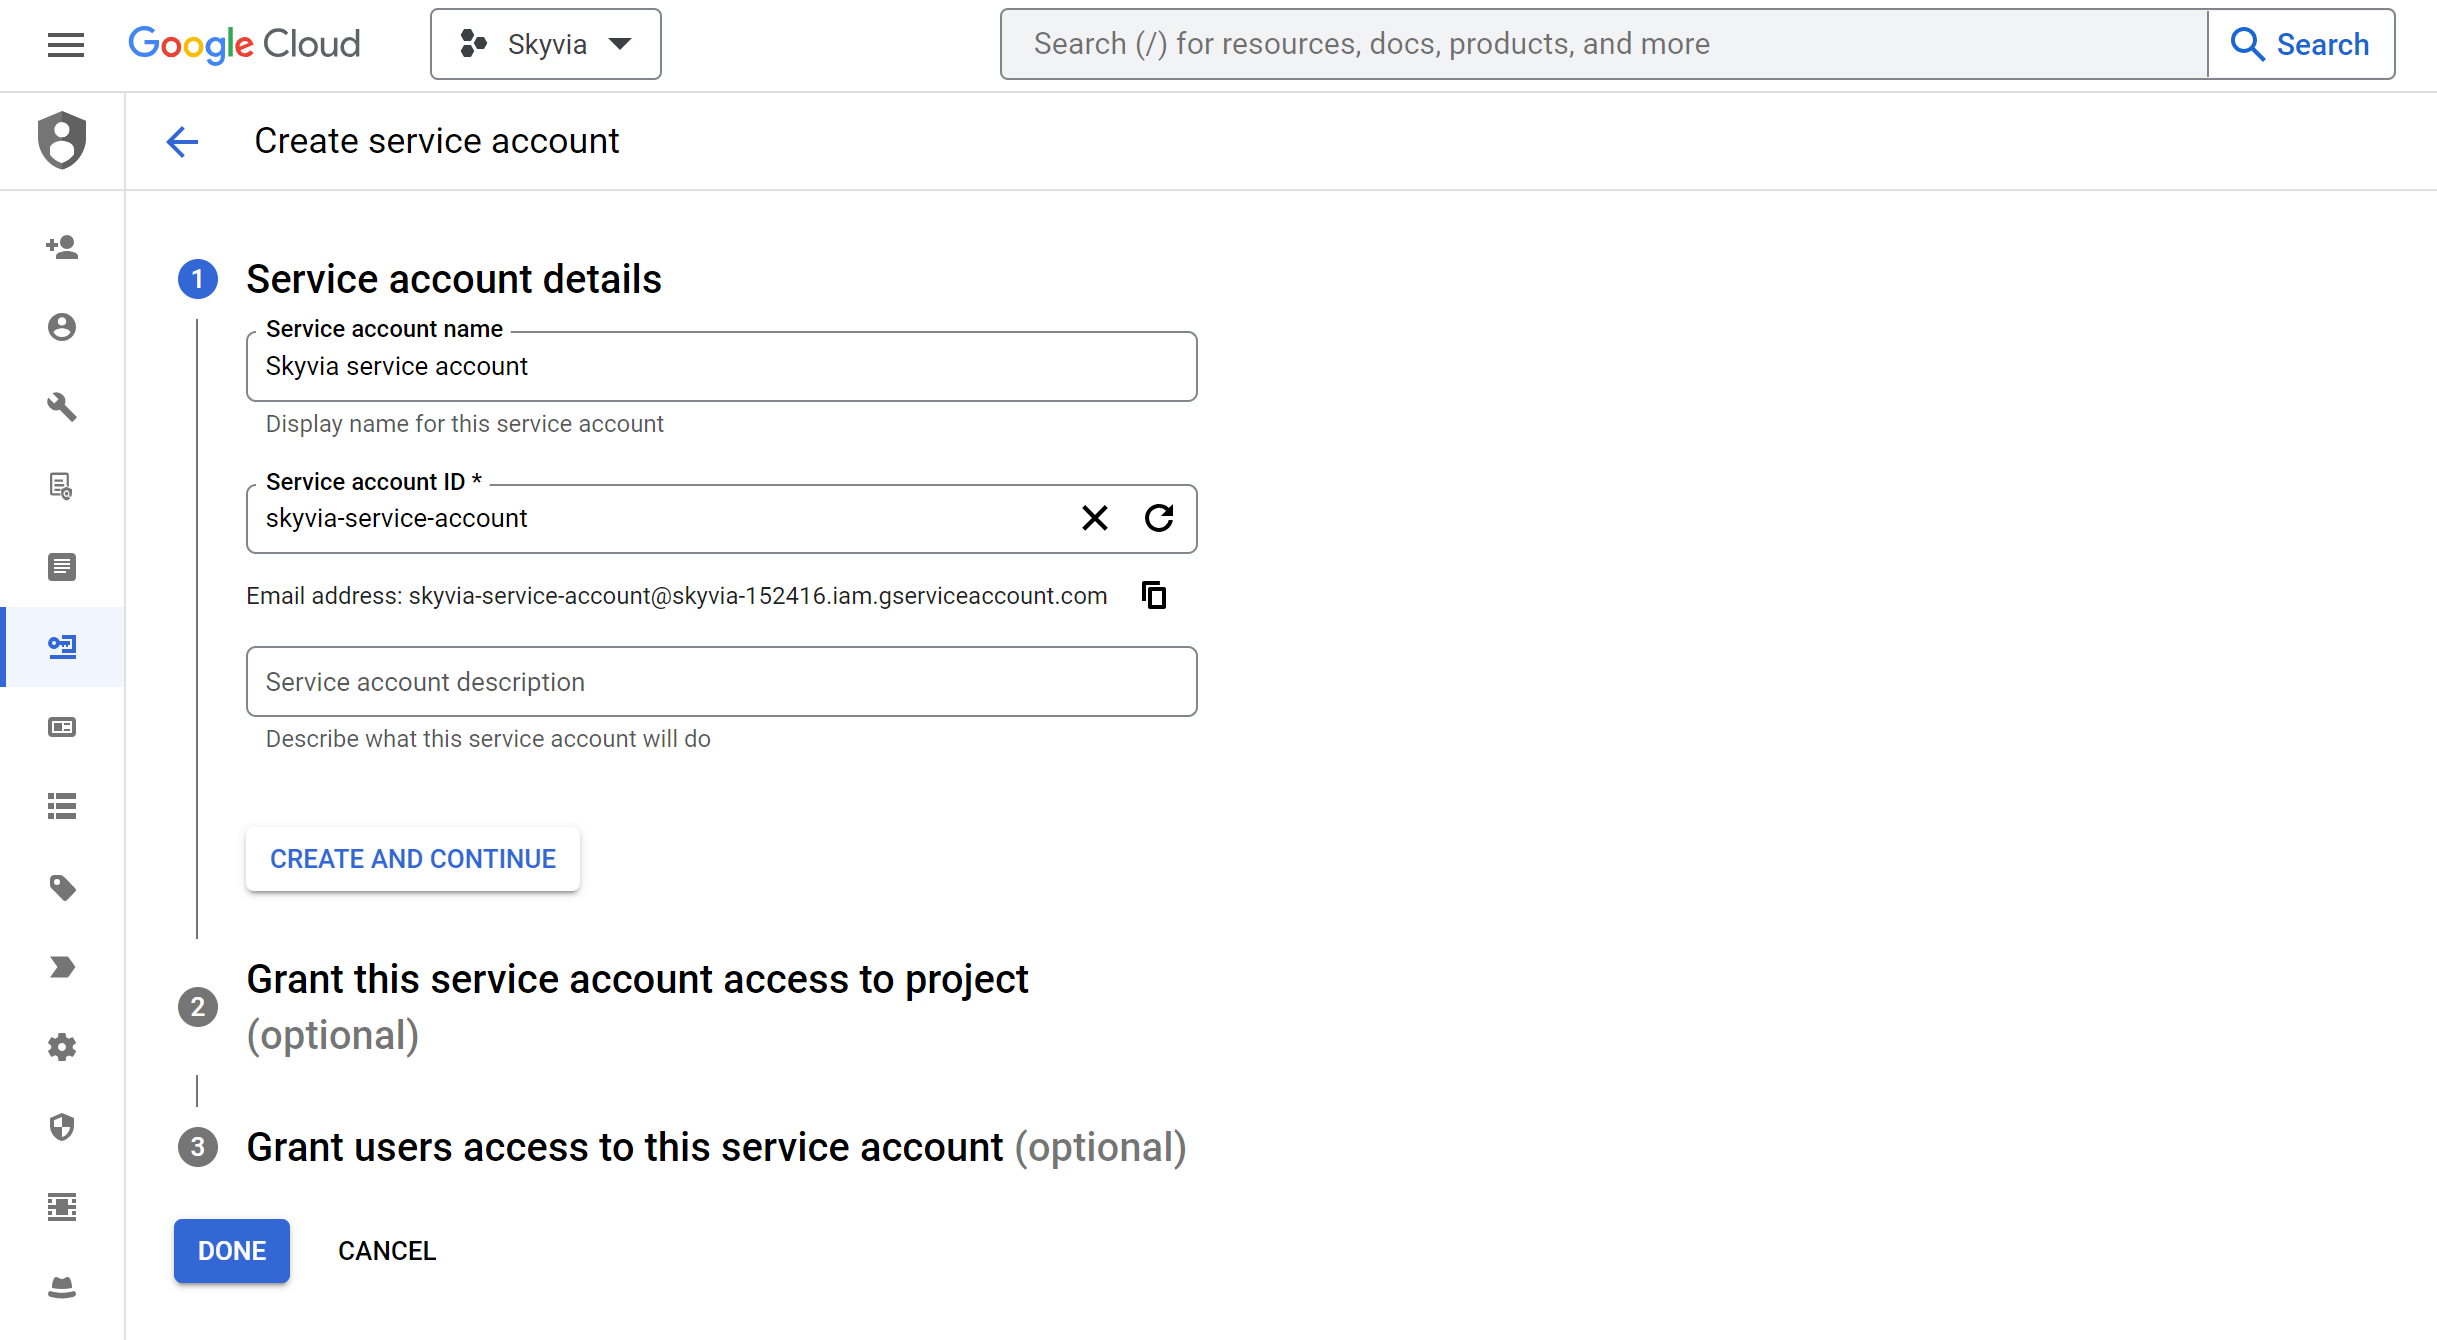 Creating service account